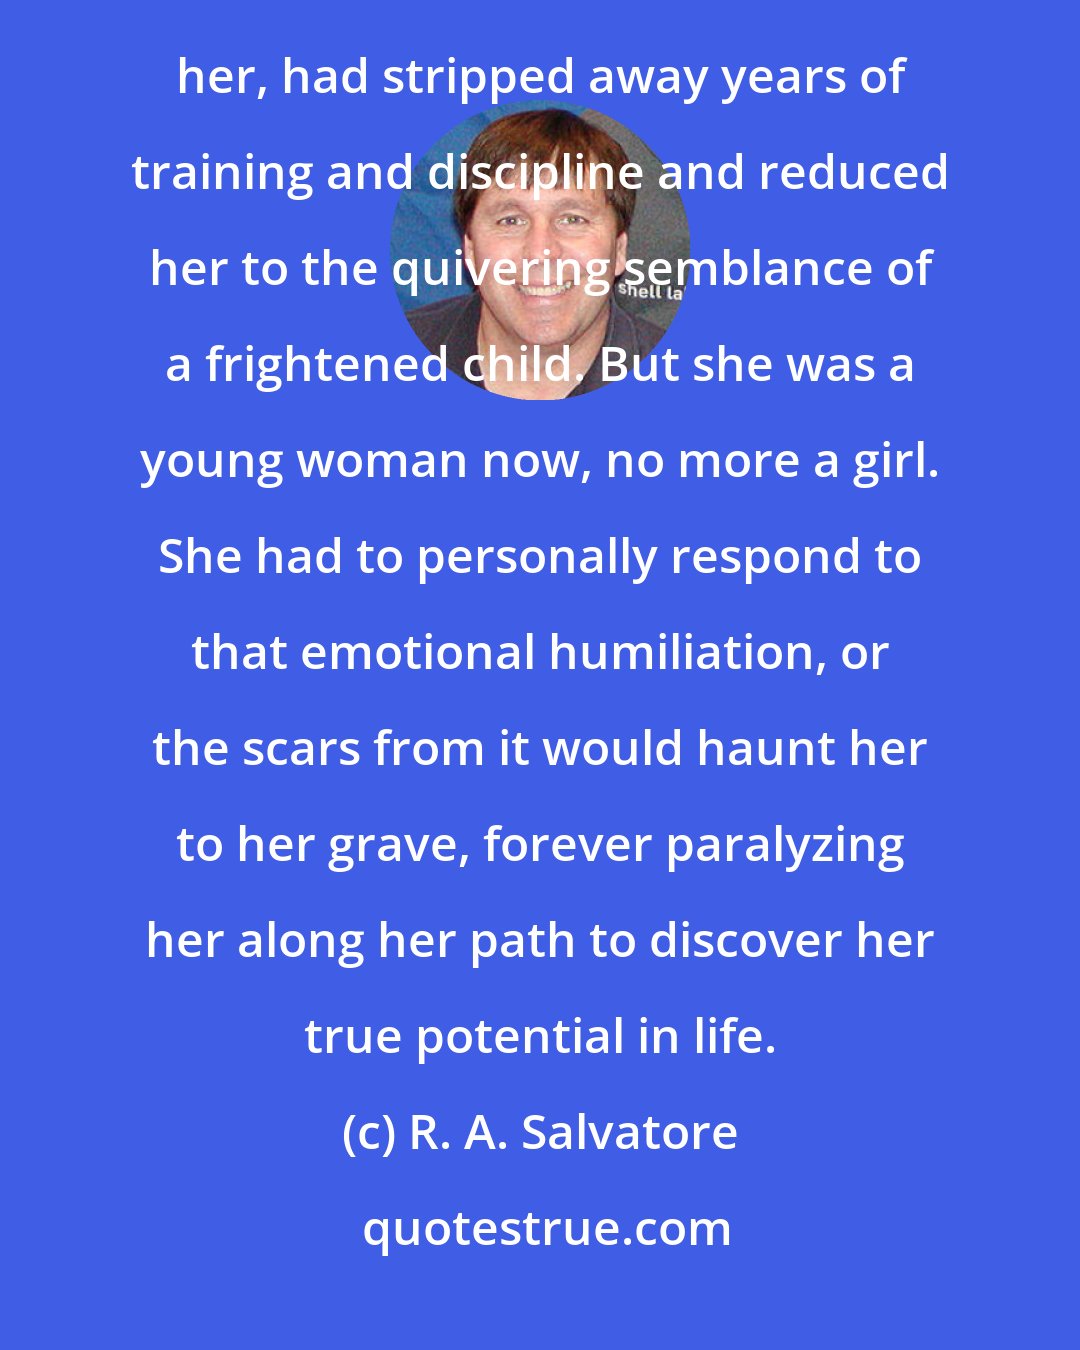 R. A. Salvatore: Selfishly, perhaps, Catti-brie had determined that the assassin was her own business. He had unnerved her, had stripped away years of training and discipline and reduced her to the quivering semblance of a frightened child. But she was a young woman now, no more a girl. She had to personally respond to that emotional humiliation, or the scars from it would haunt her to her grave, forever paralyzing her along her path to discover her true potential in life.